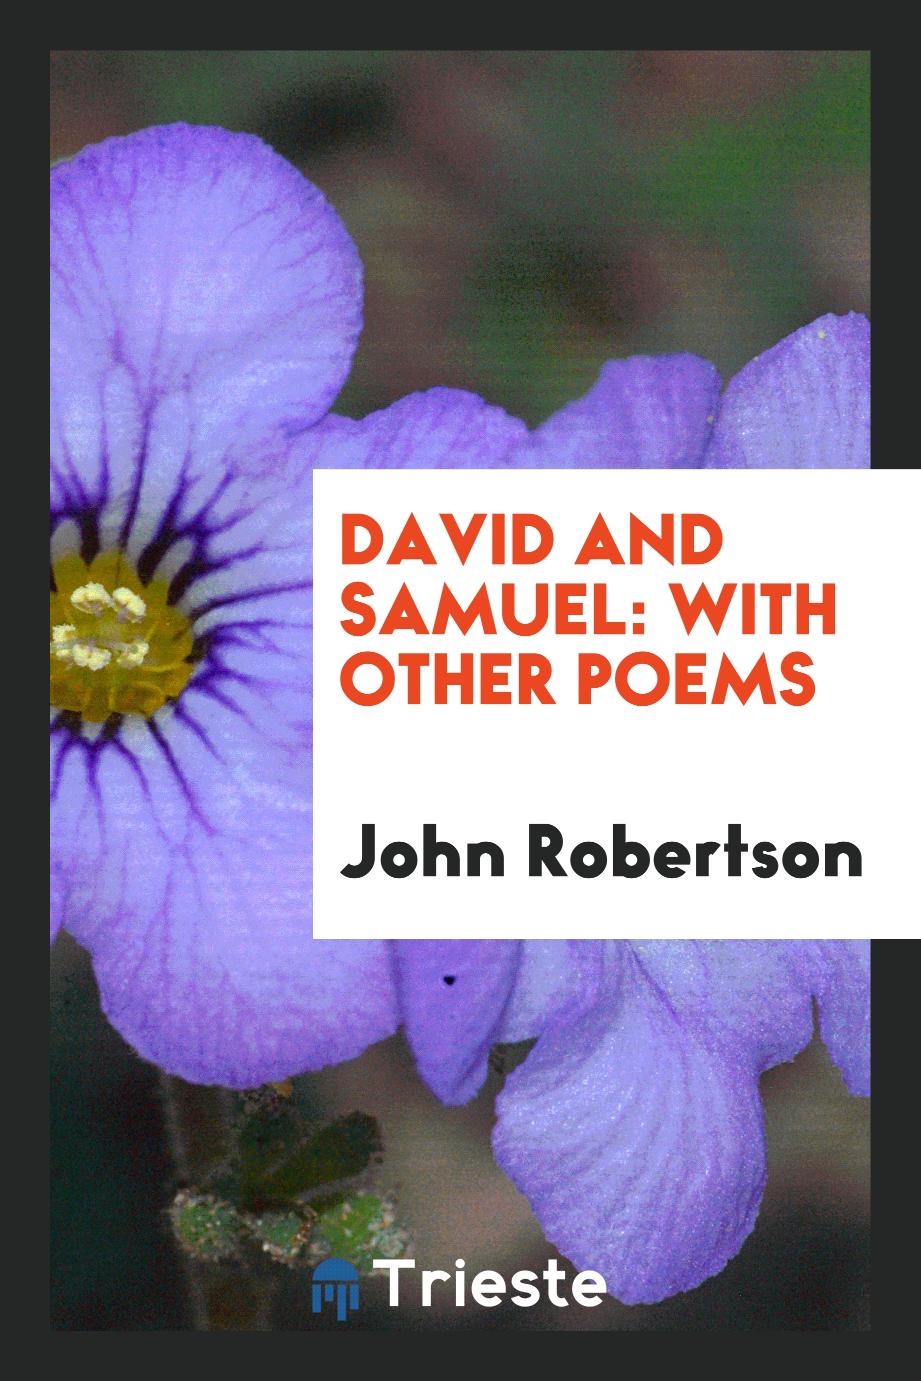 David and Samuel: With Other Poems